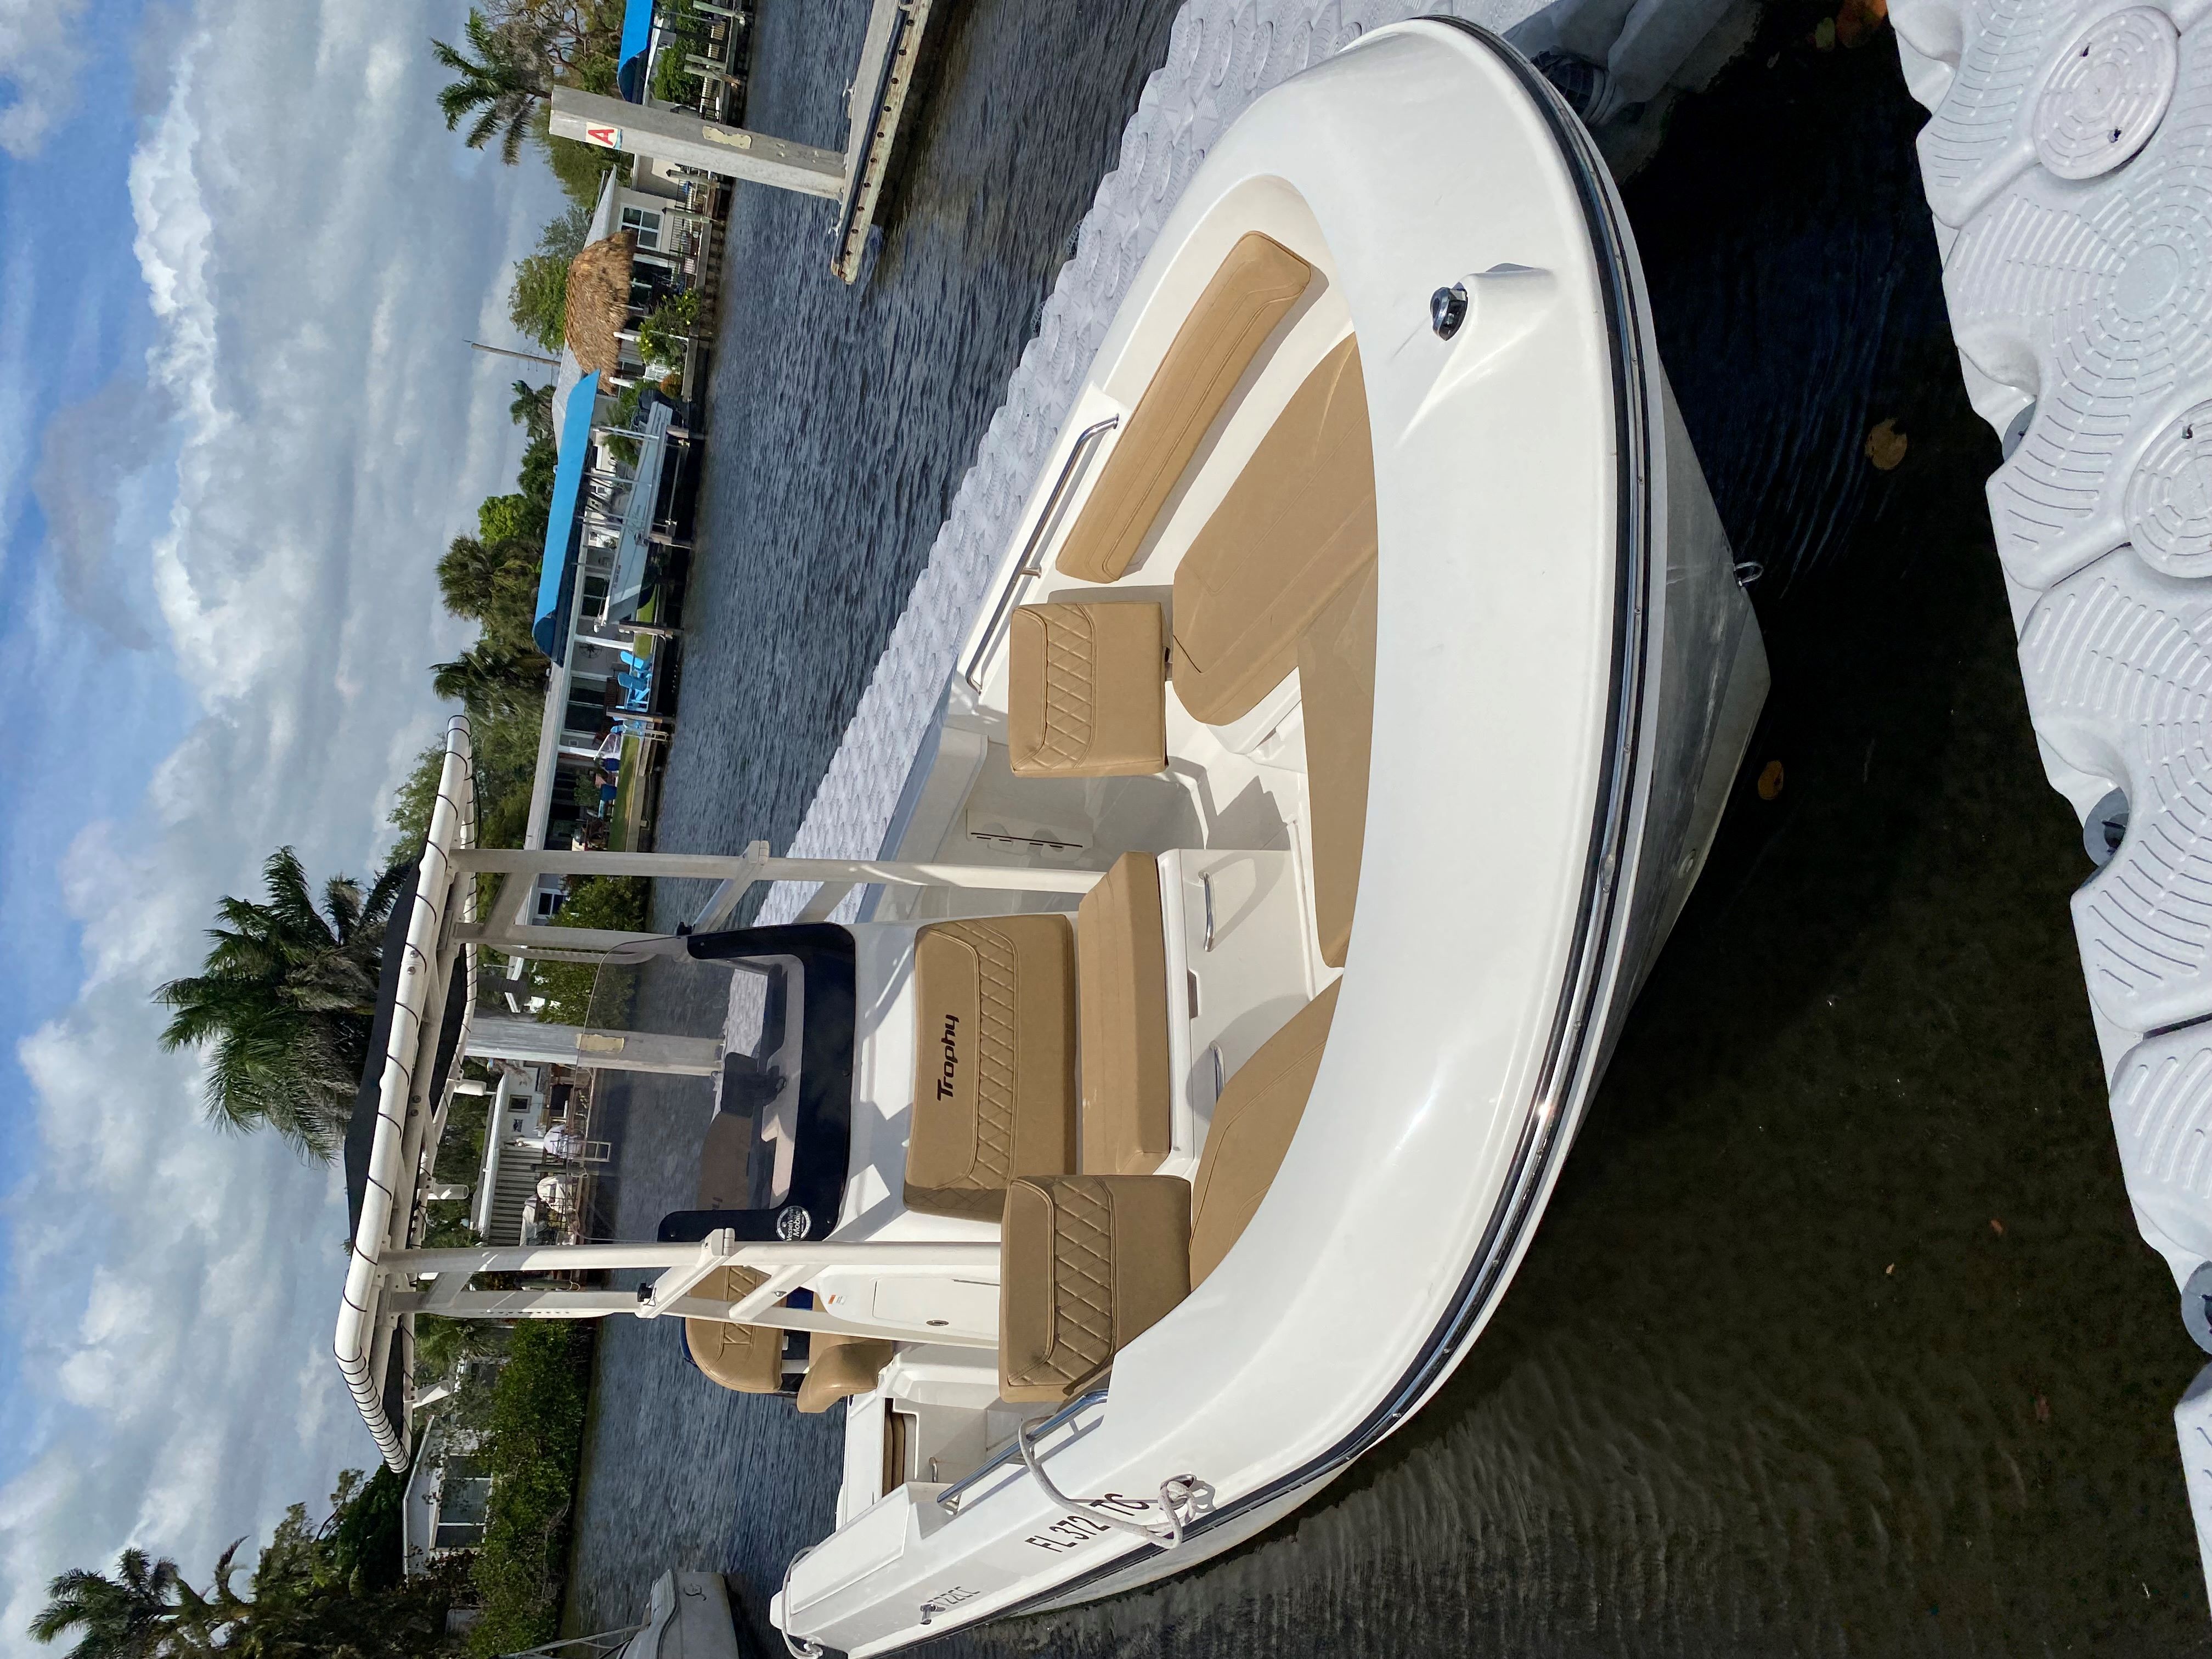 KNOTTY PINES (23FT Bayliner Trophy  Center Console - 150 HP Fishing)